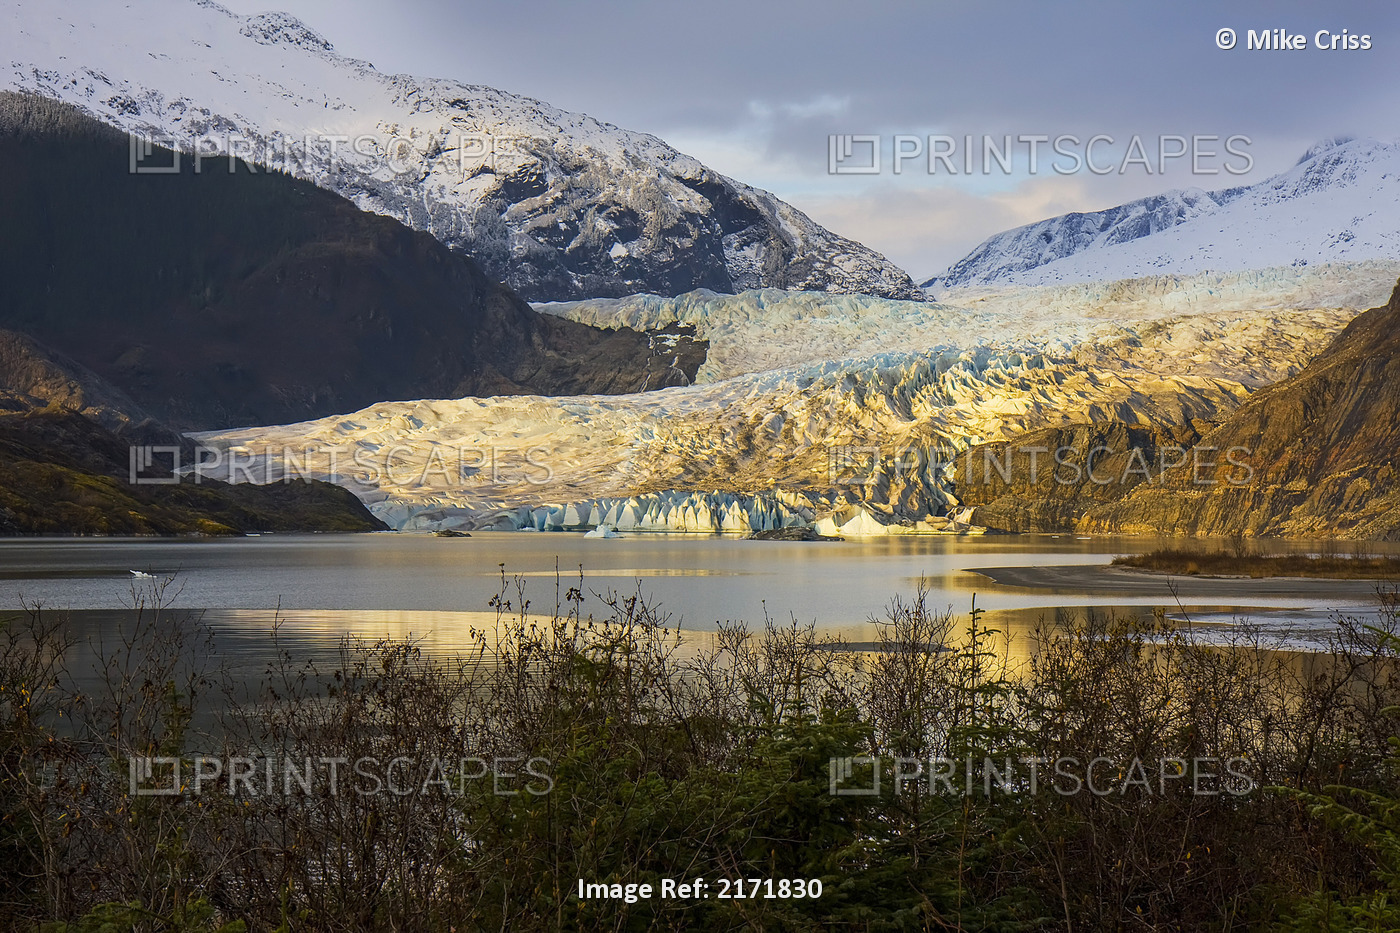 Scenic View Of Mendenhall Glacier Near Juneau, Alaska In Late Autumn, Hdr Image